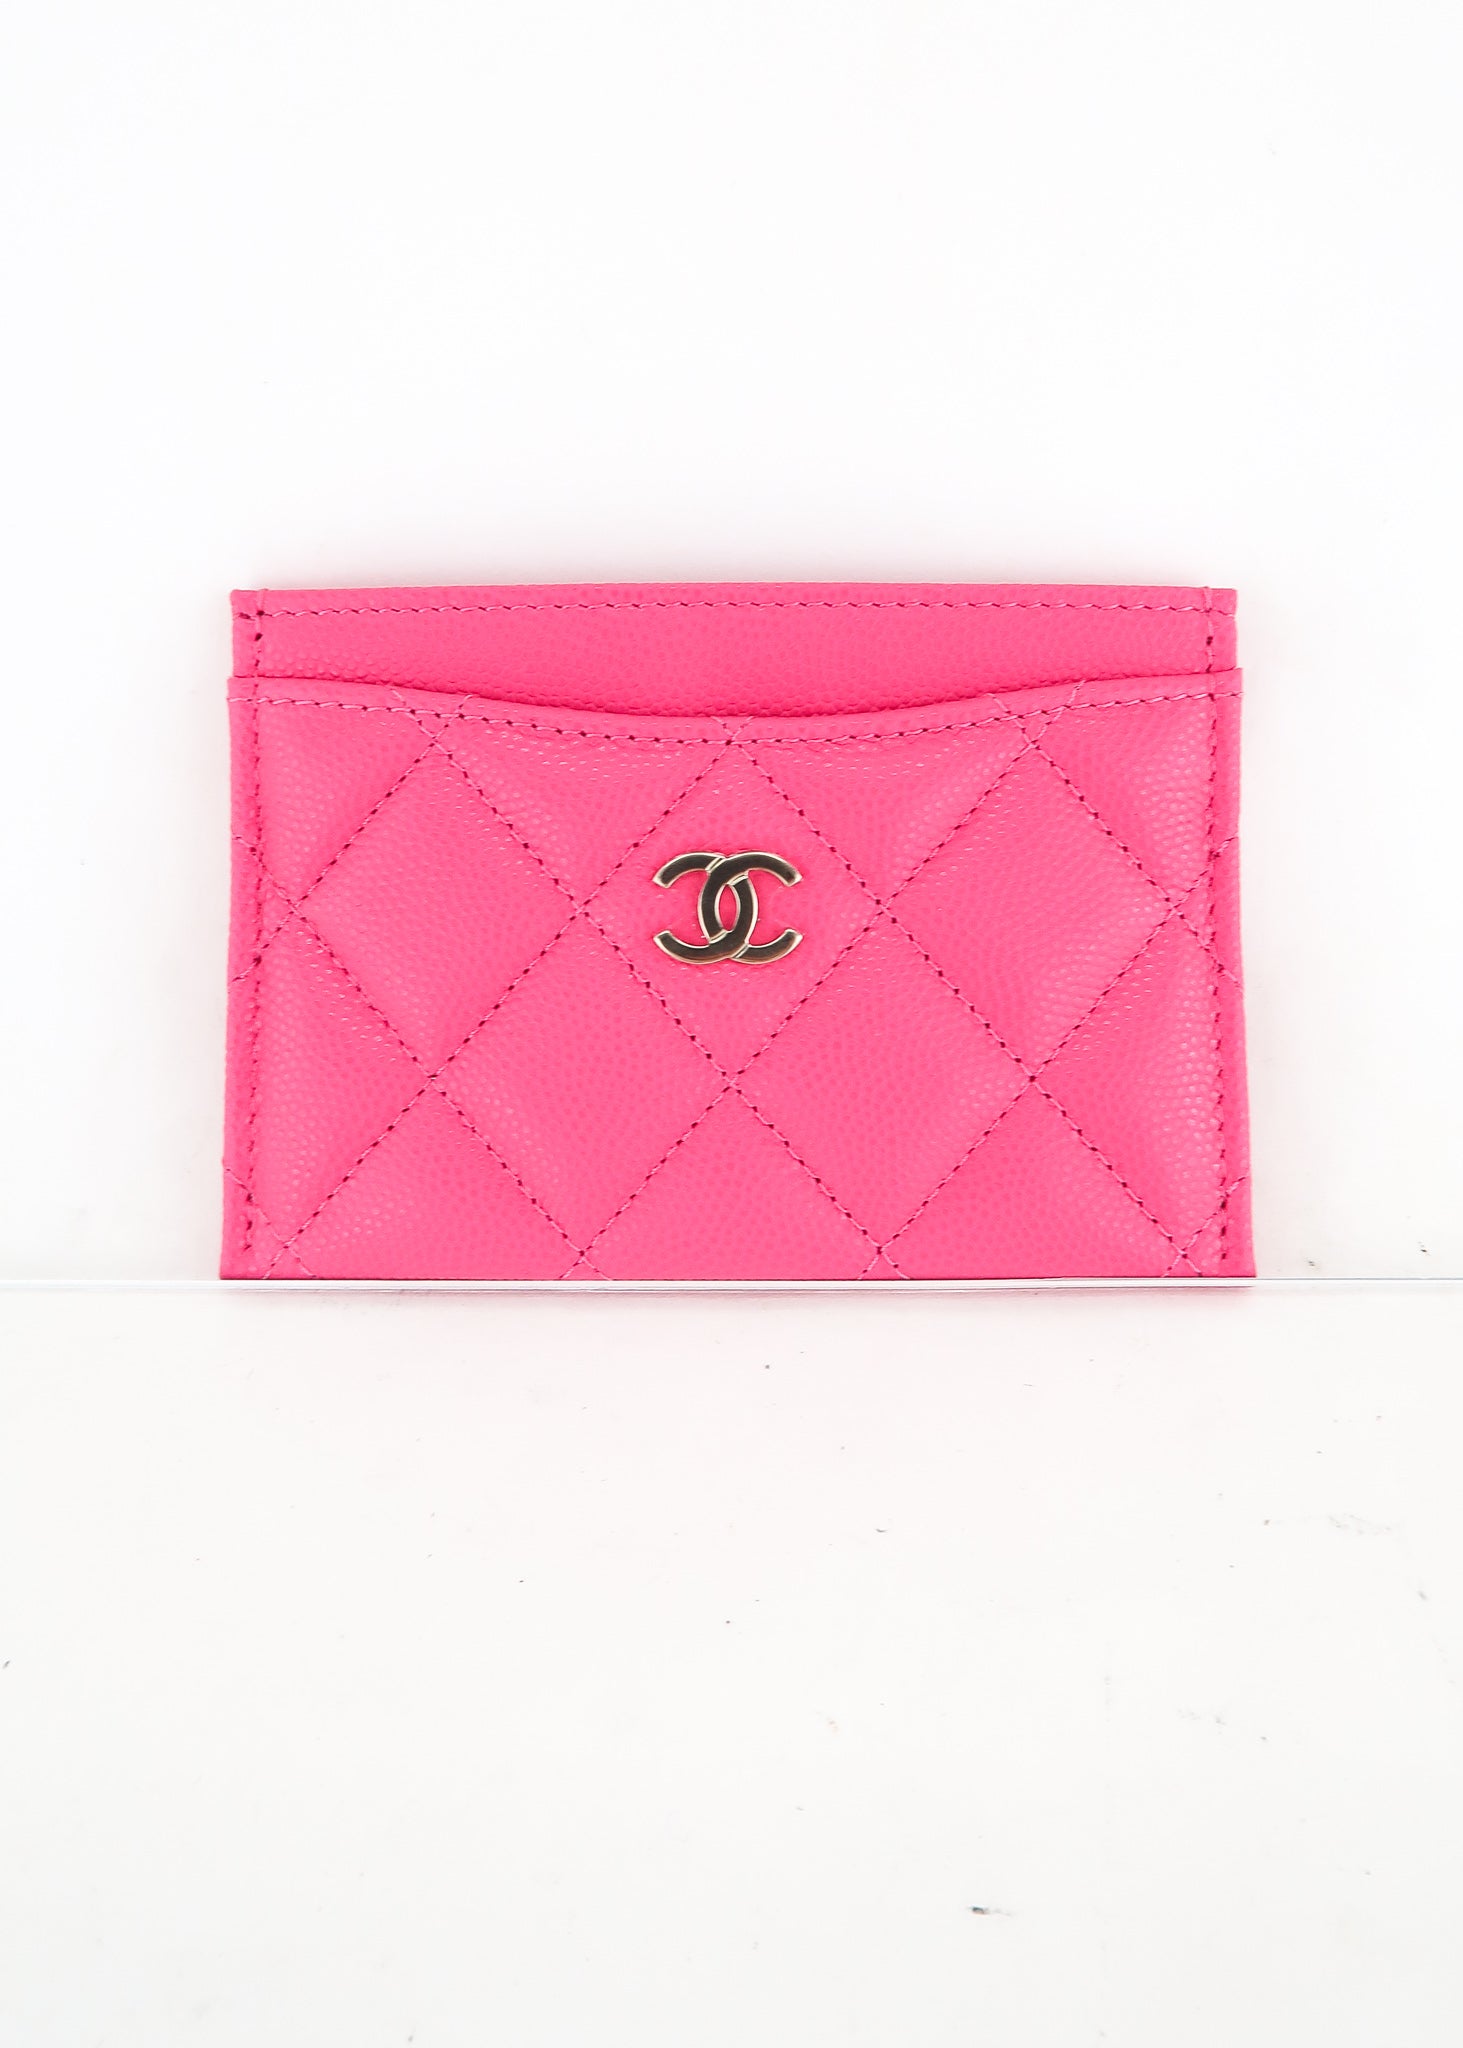 CHANEL Caviar Quilted Key Holder Case Pink 429987